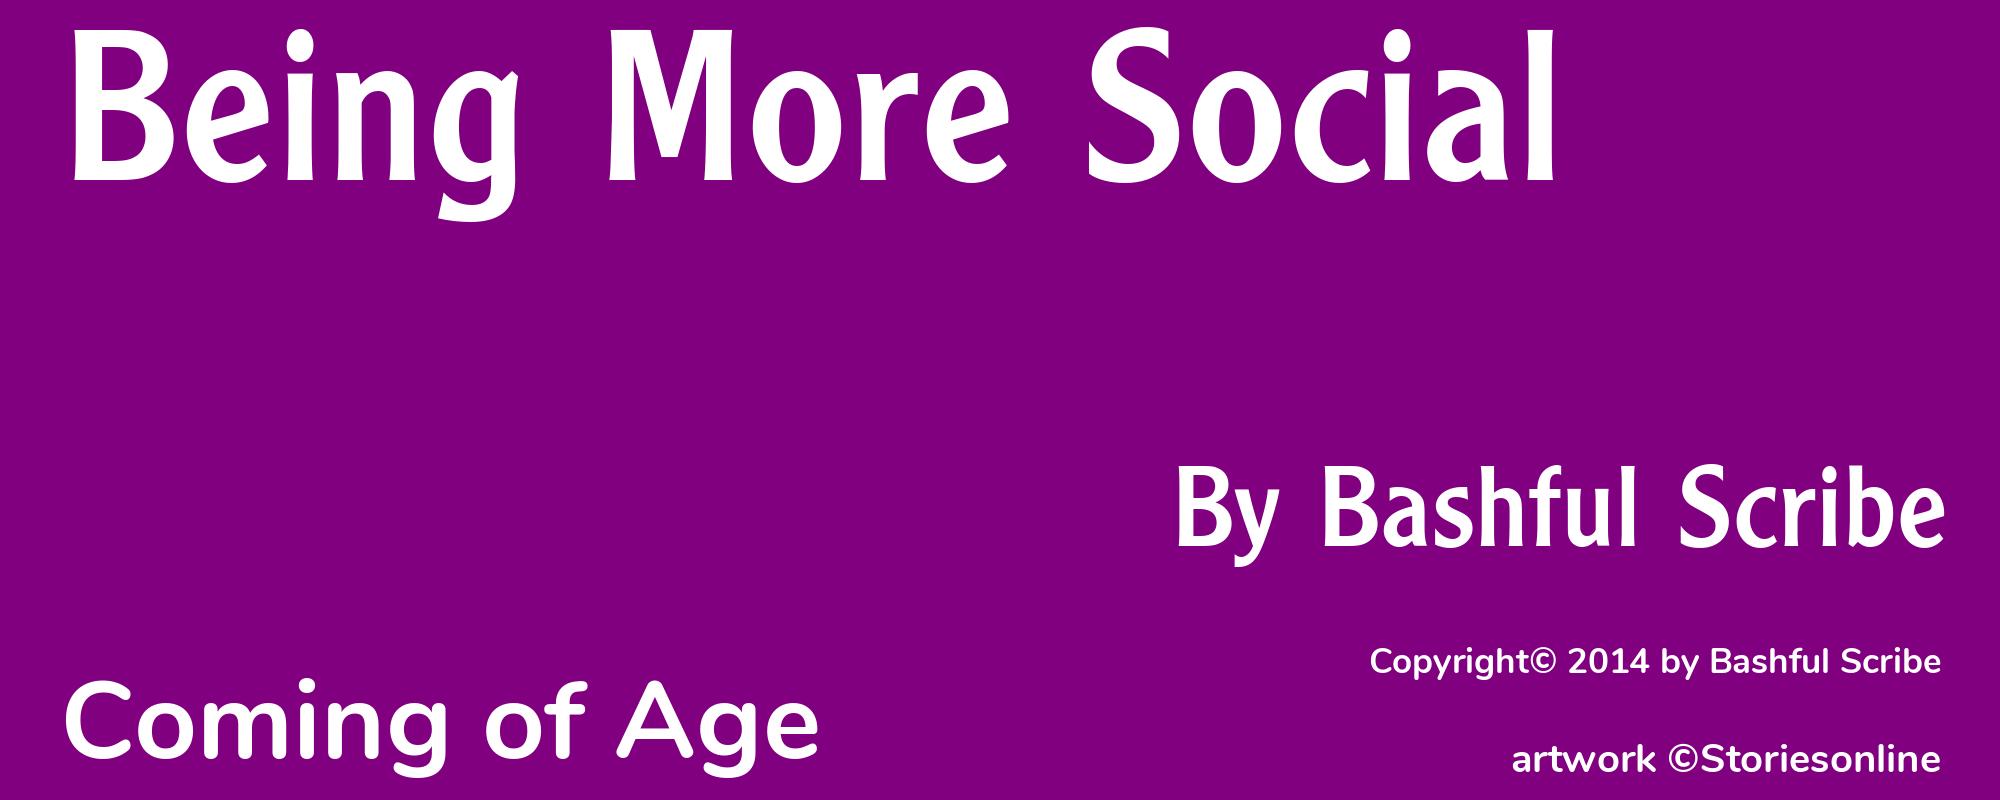 Being More Social - Cover